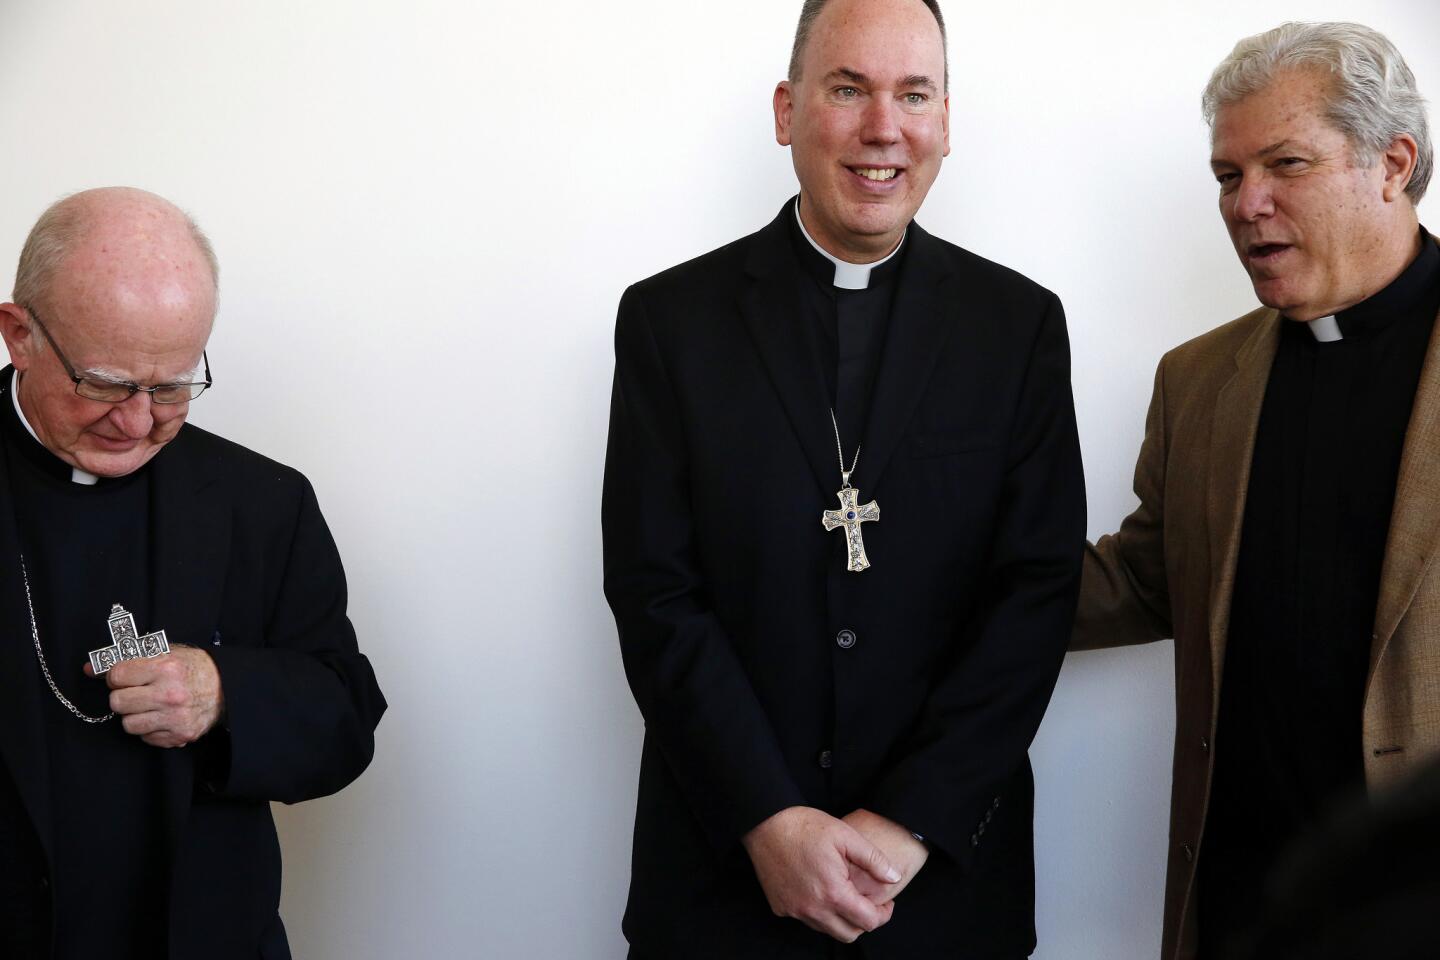 Bishop Kevin Vann, left, the Rev. Timothy Freyer, center, and the Rev. Steve Sallot pose for pictures after a news conference announcing Freyer's appointment by the Holy See as auxiliary bishop for the Diocese of Orange.